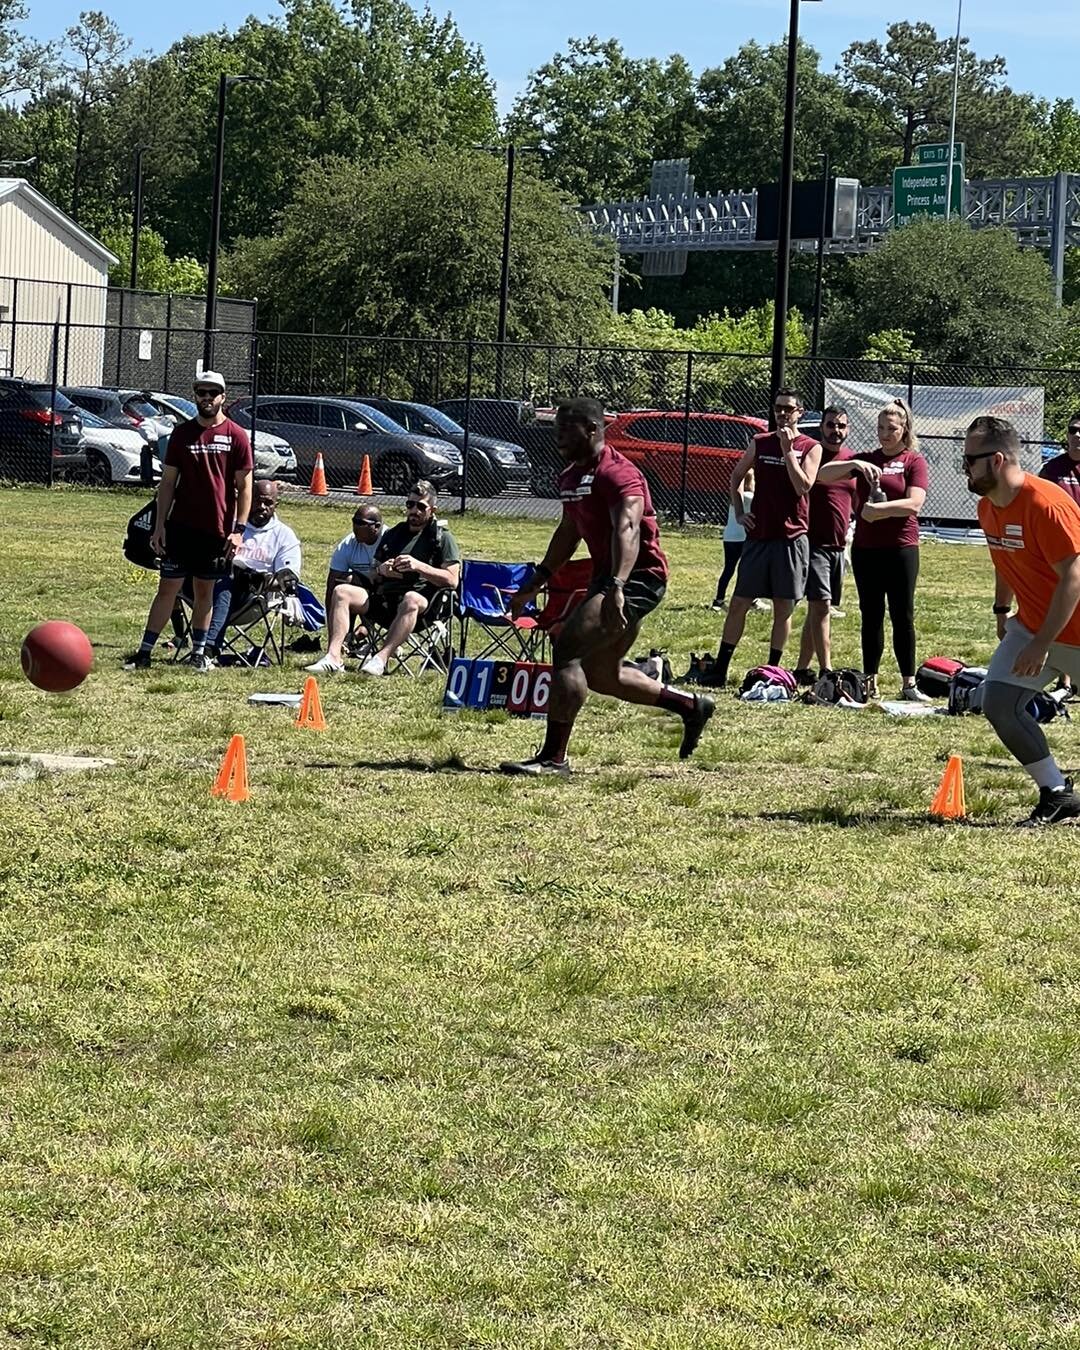 It may have stormed last night, but it&rsquo;s gorgeous today! A great day for kickball!

We also have our bake sale happening, so bring your money!

#stonewallsportsnorfolk #stonewallsports